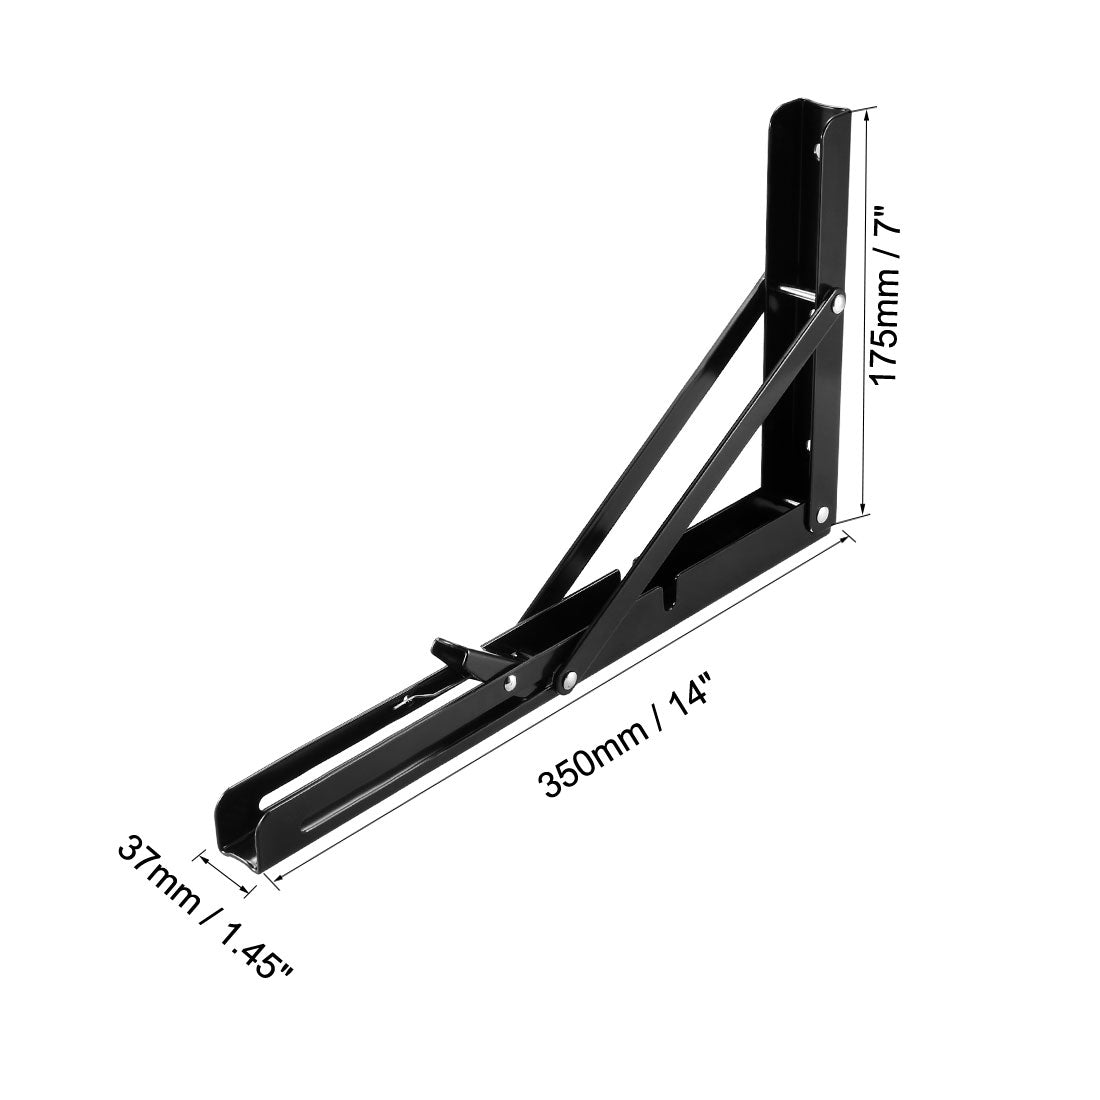 uxcell Uxcell Folding Bracket 14 inch 350mm for Shelves Table Desk Wall Mounted Support Collapsible Long Release Arm Space Saving Carbon Steel